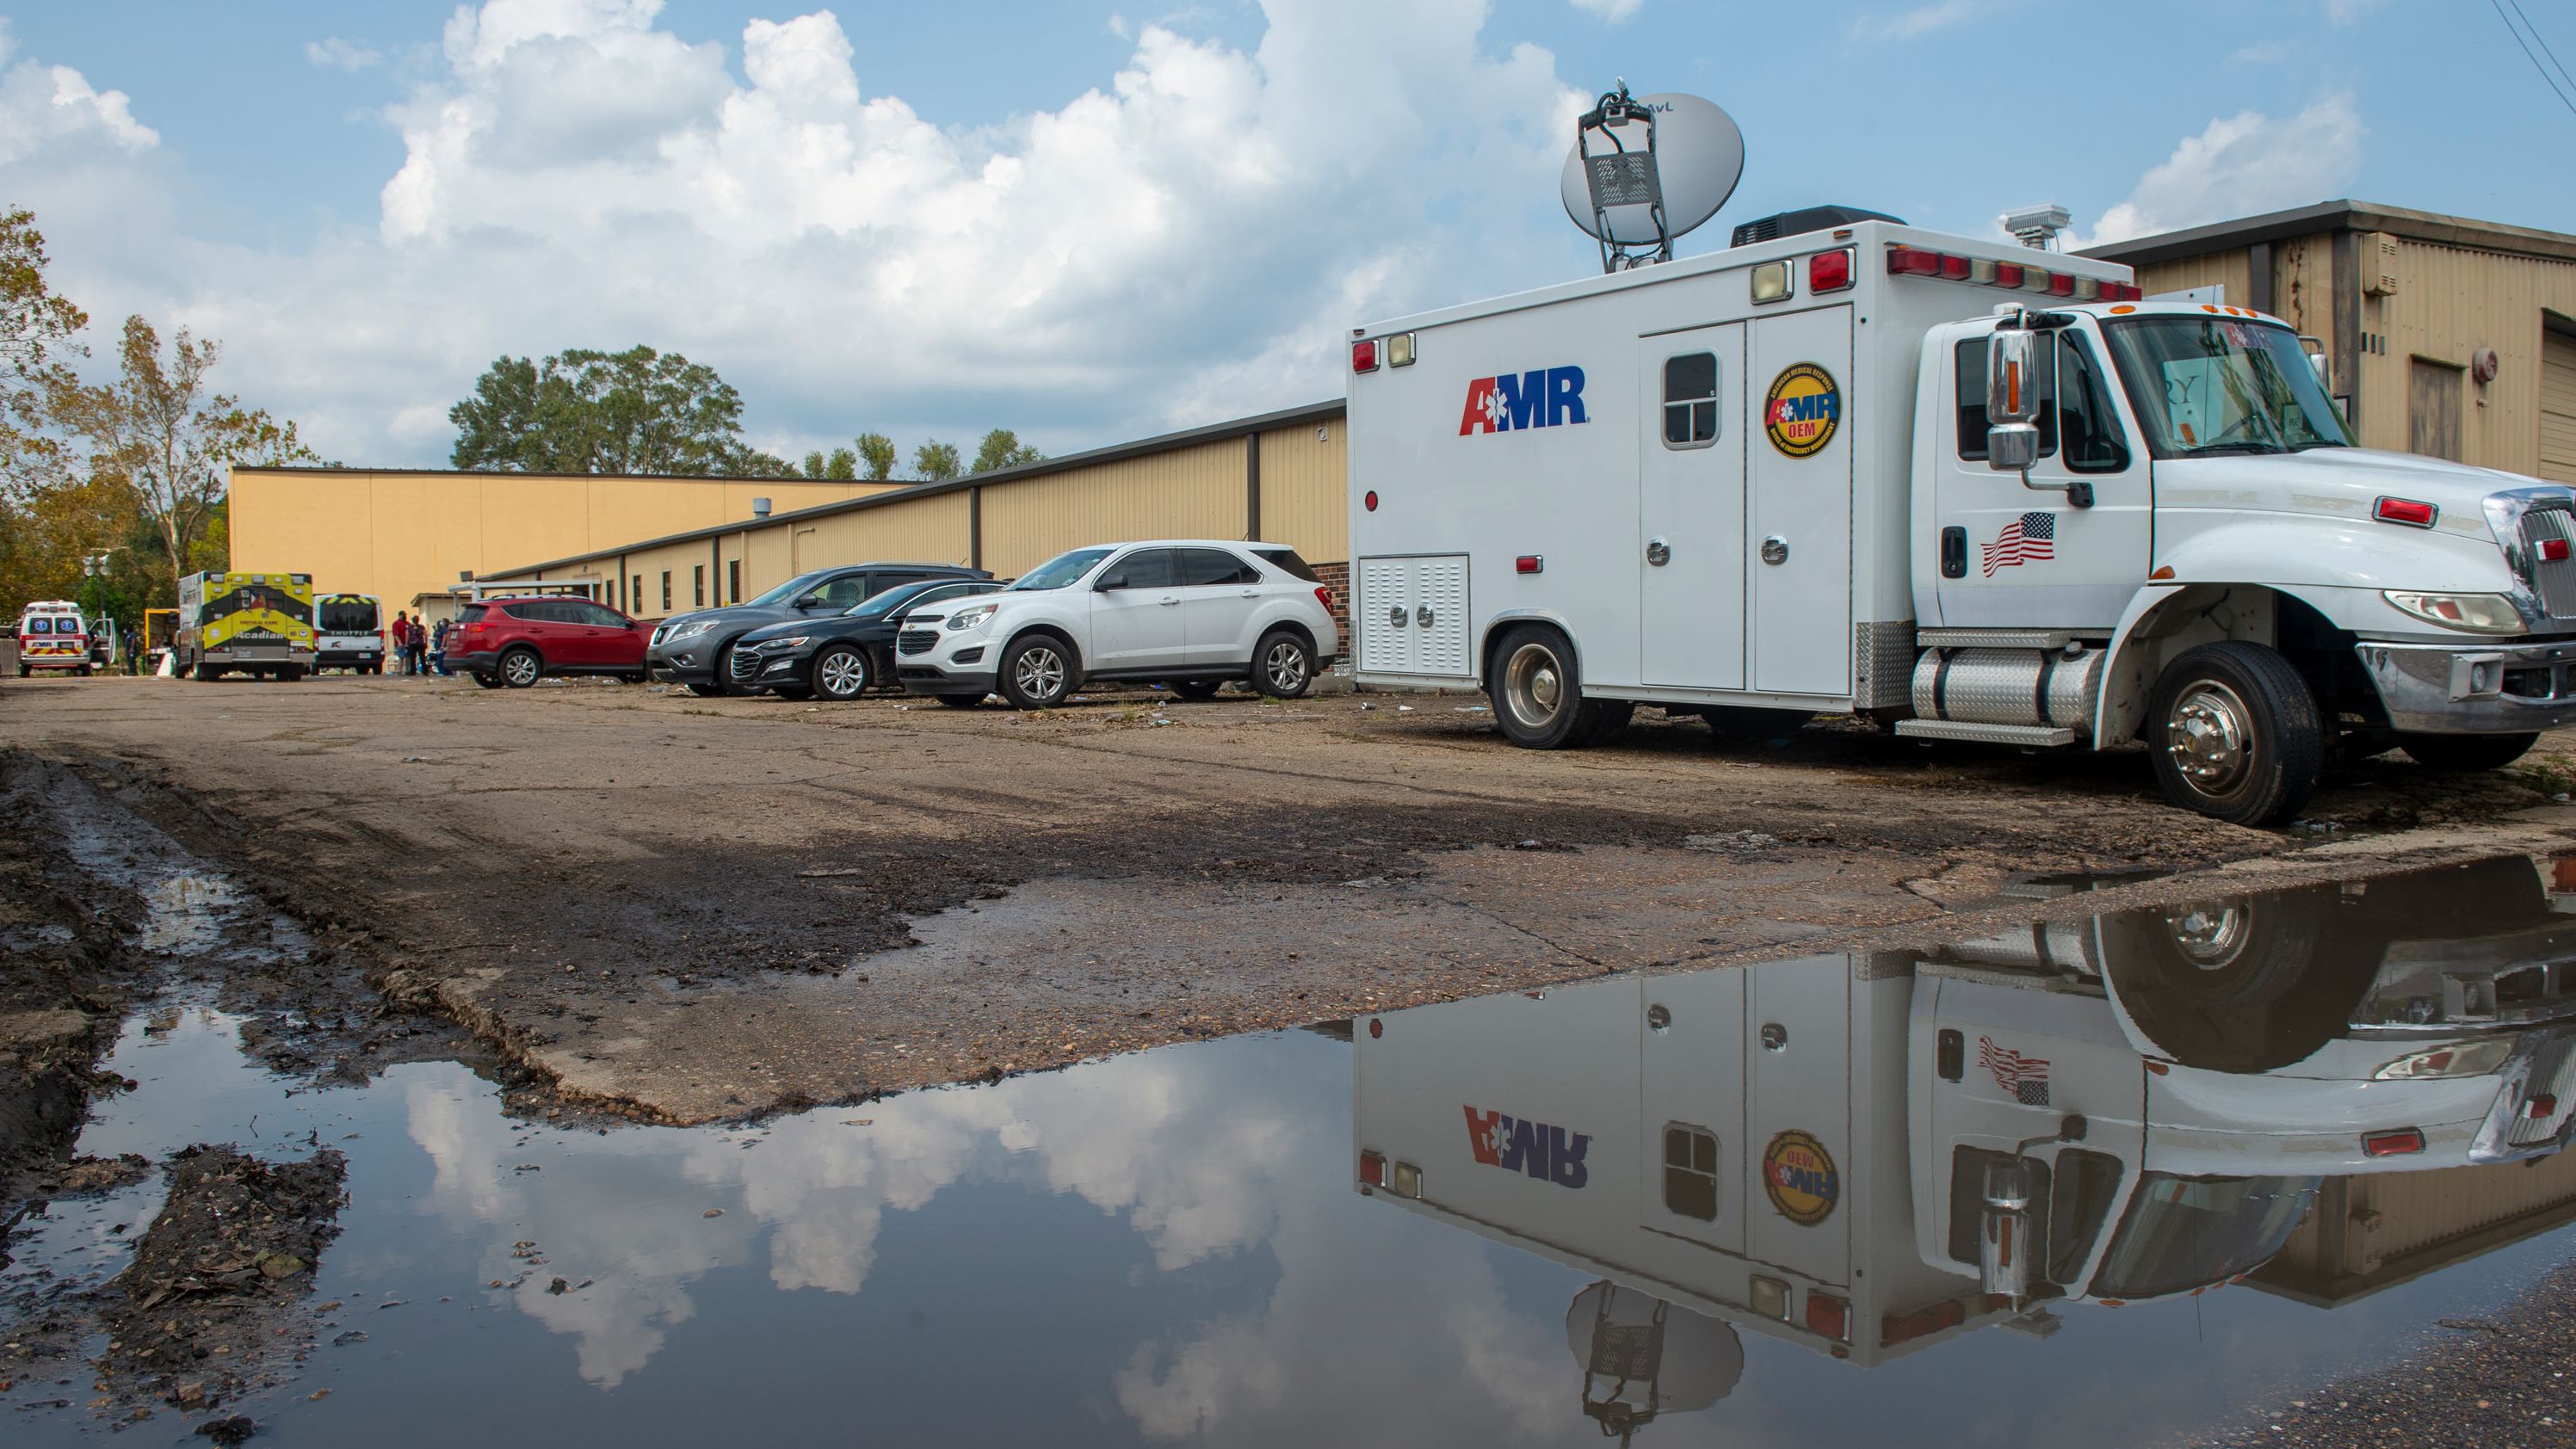 Emergency vehicles respond to evacuate people at a shelter in Independence, Louisiana, on Thursday.